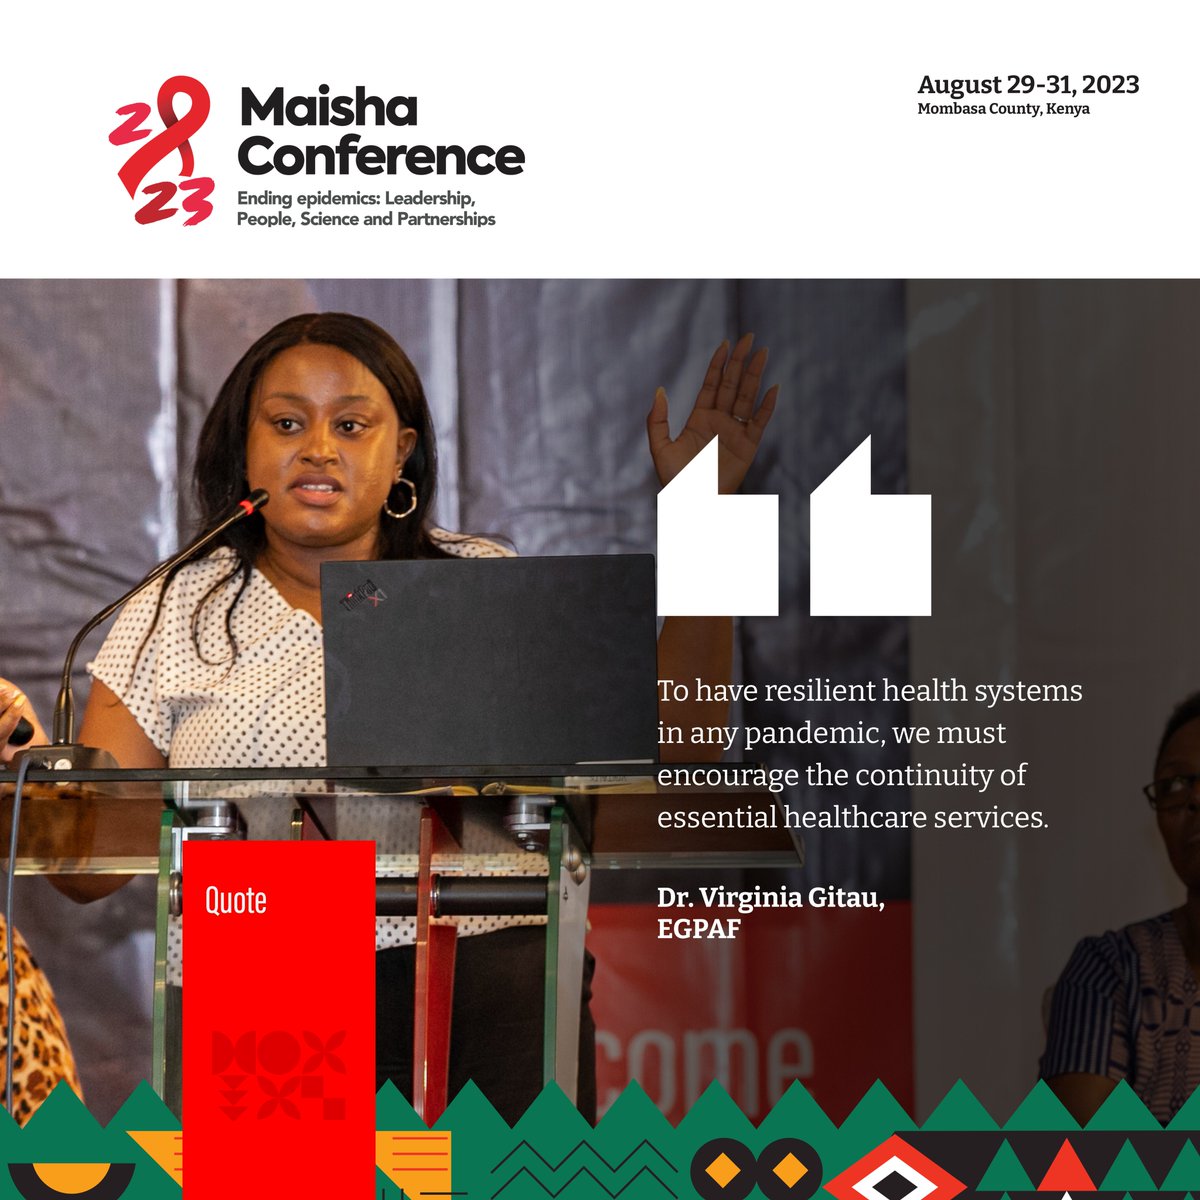 Integrating COVID-19 services into HIV testing led to efficient and timely services, as both tests can be done within 20 minutes - Dr. Virginia Gitau, EGPAF. #MaishaConference2023 #endingAIDSby2030